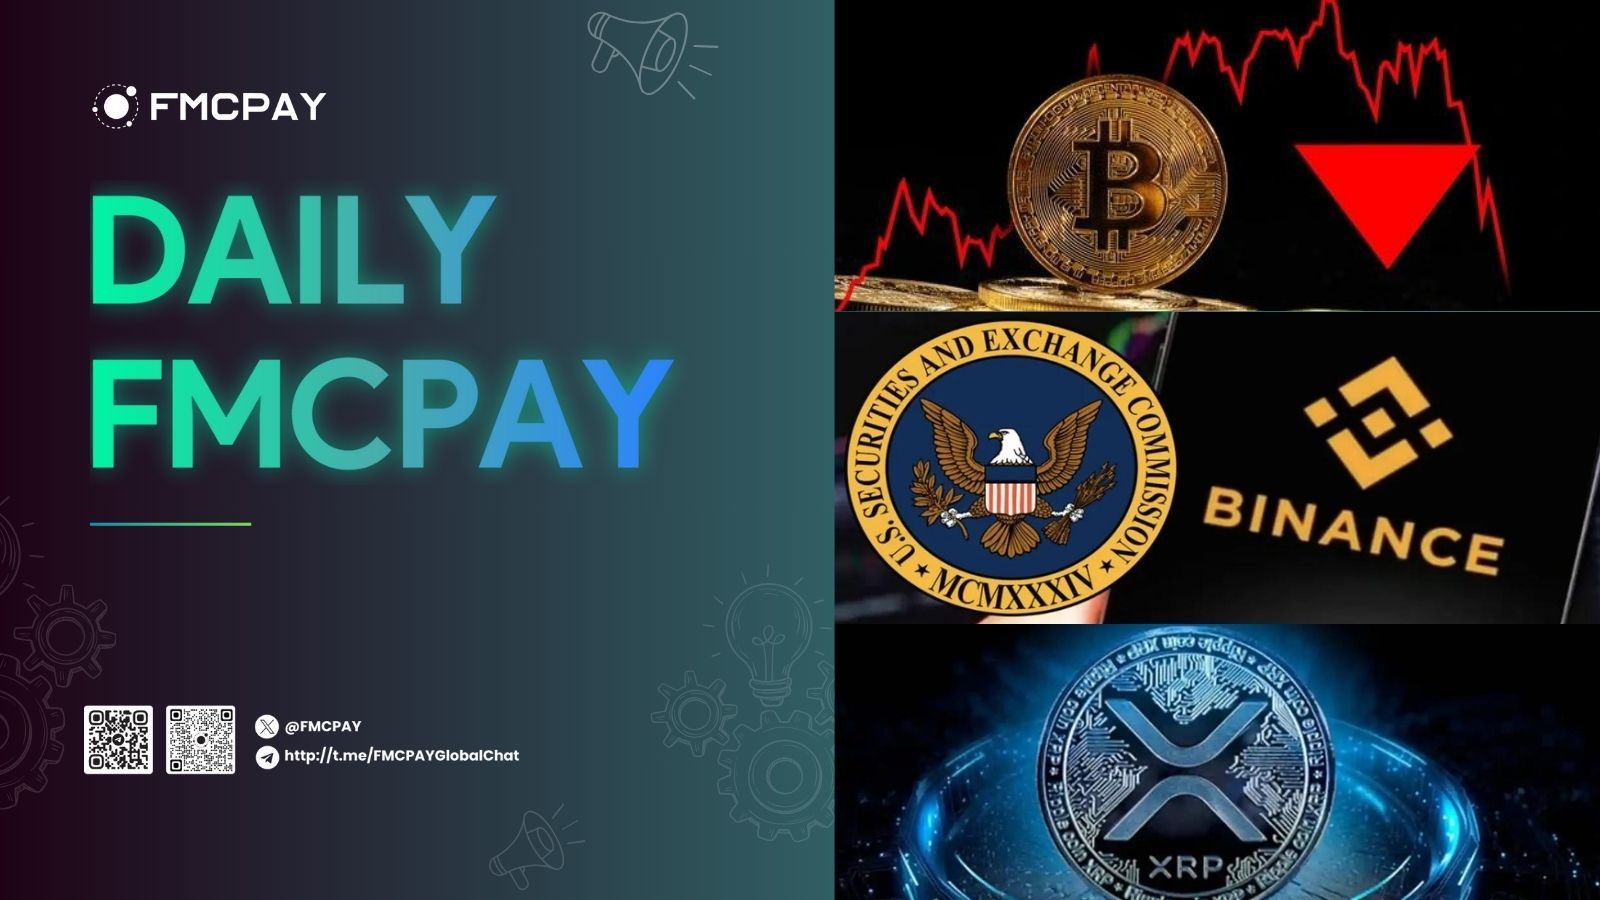 fmcpay bitcoin hash price hits all time low whats next for btc price